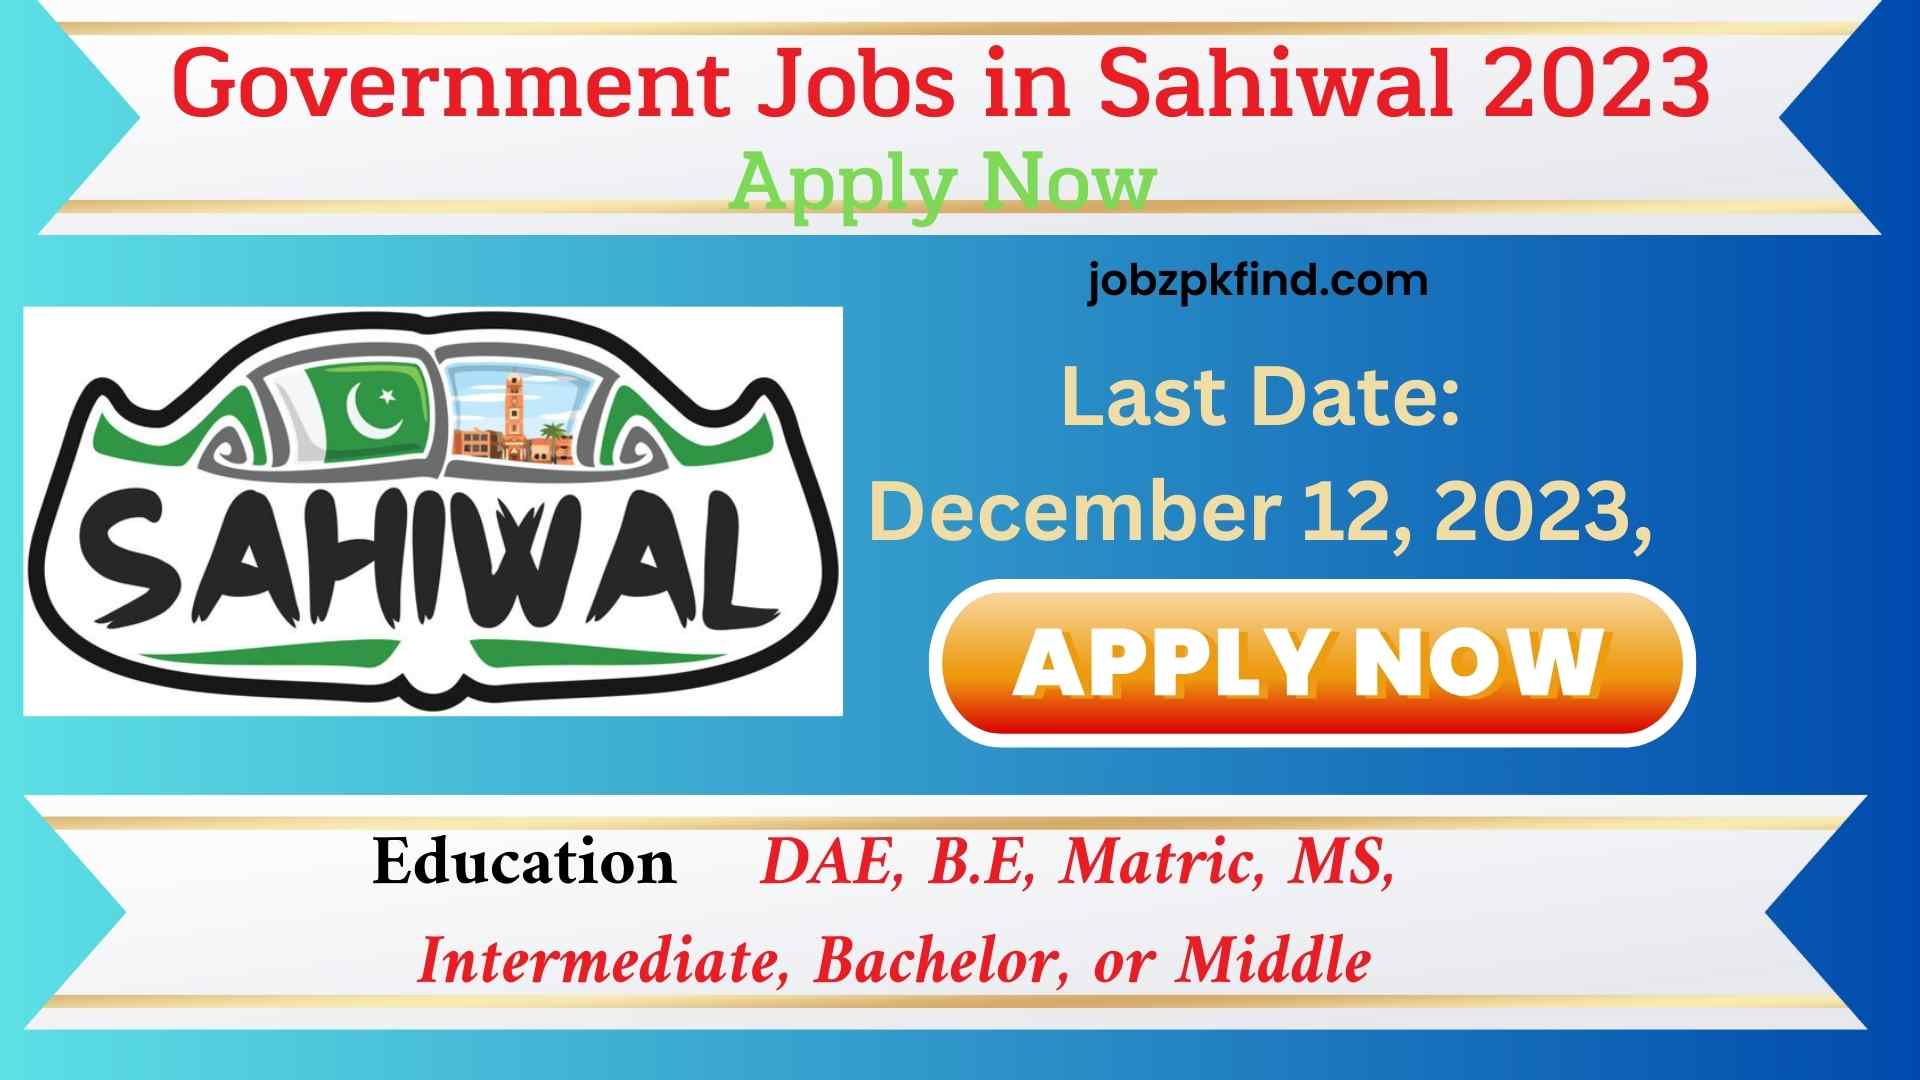 Government Jobs in Sahiwal 2023 Apply Now